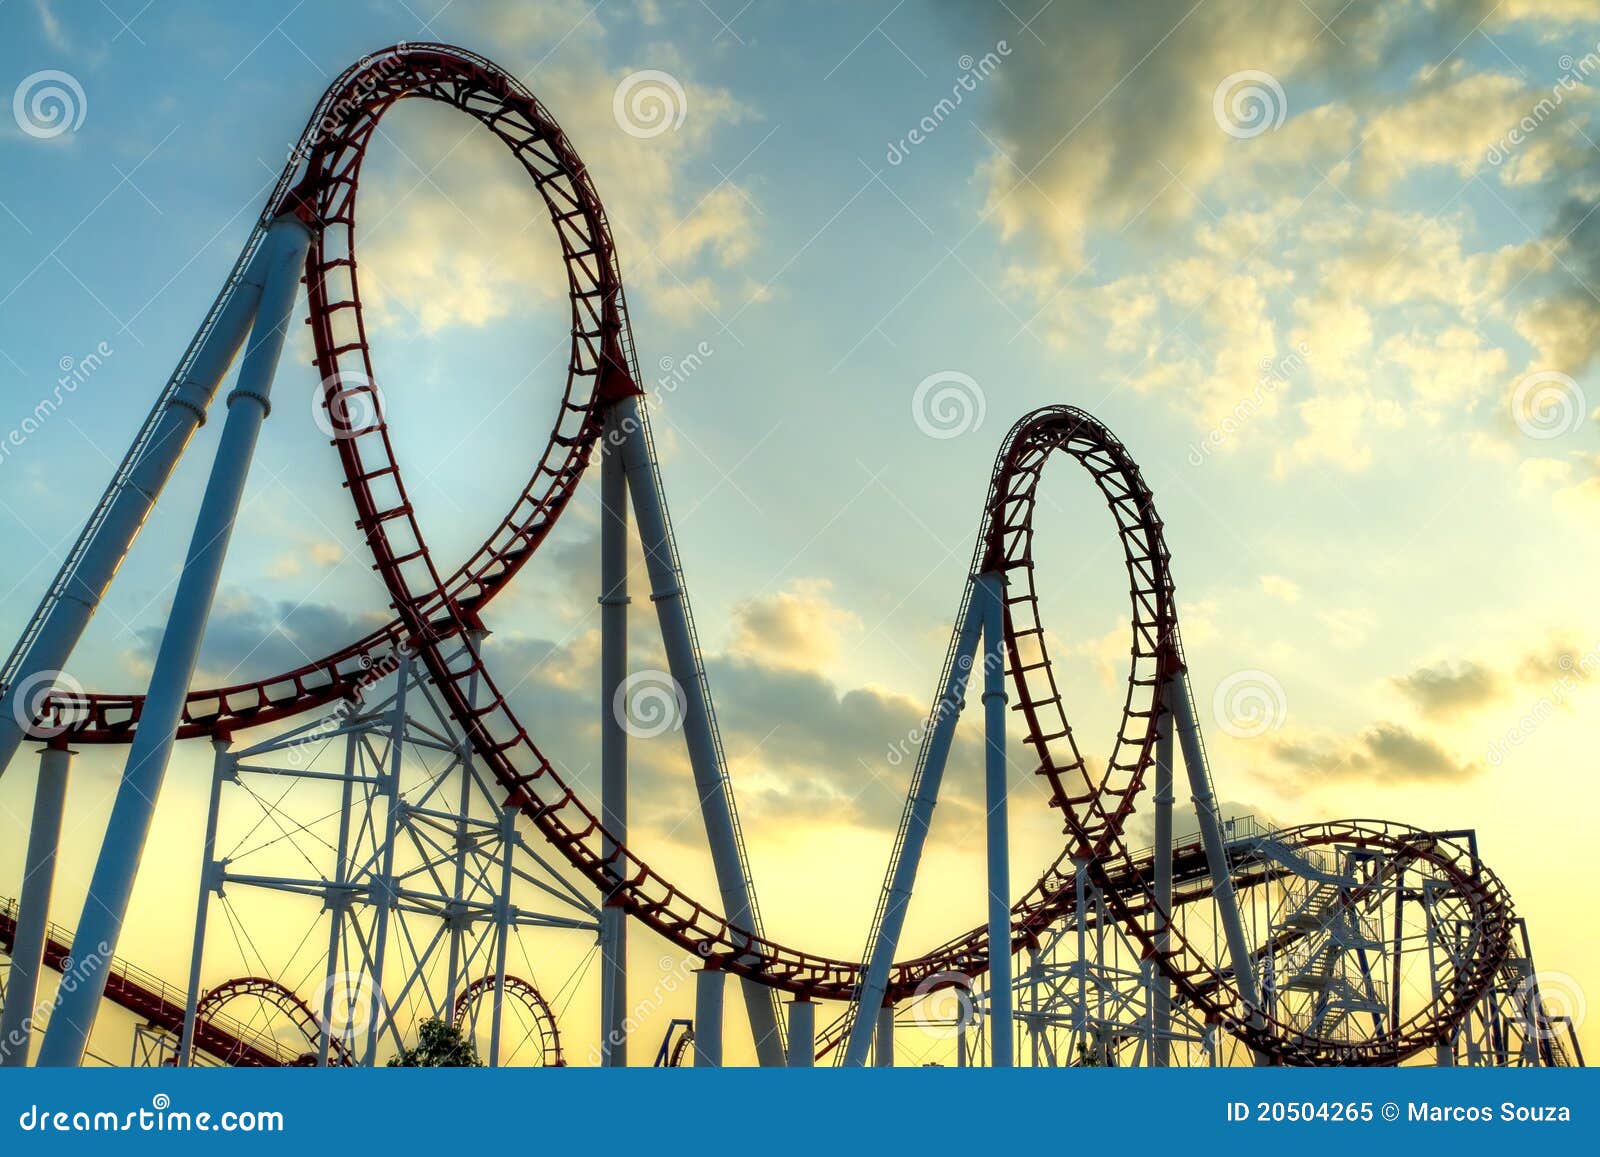 Roller Coaster Stock Image Image Of Coaster Entertainment